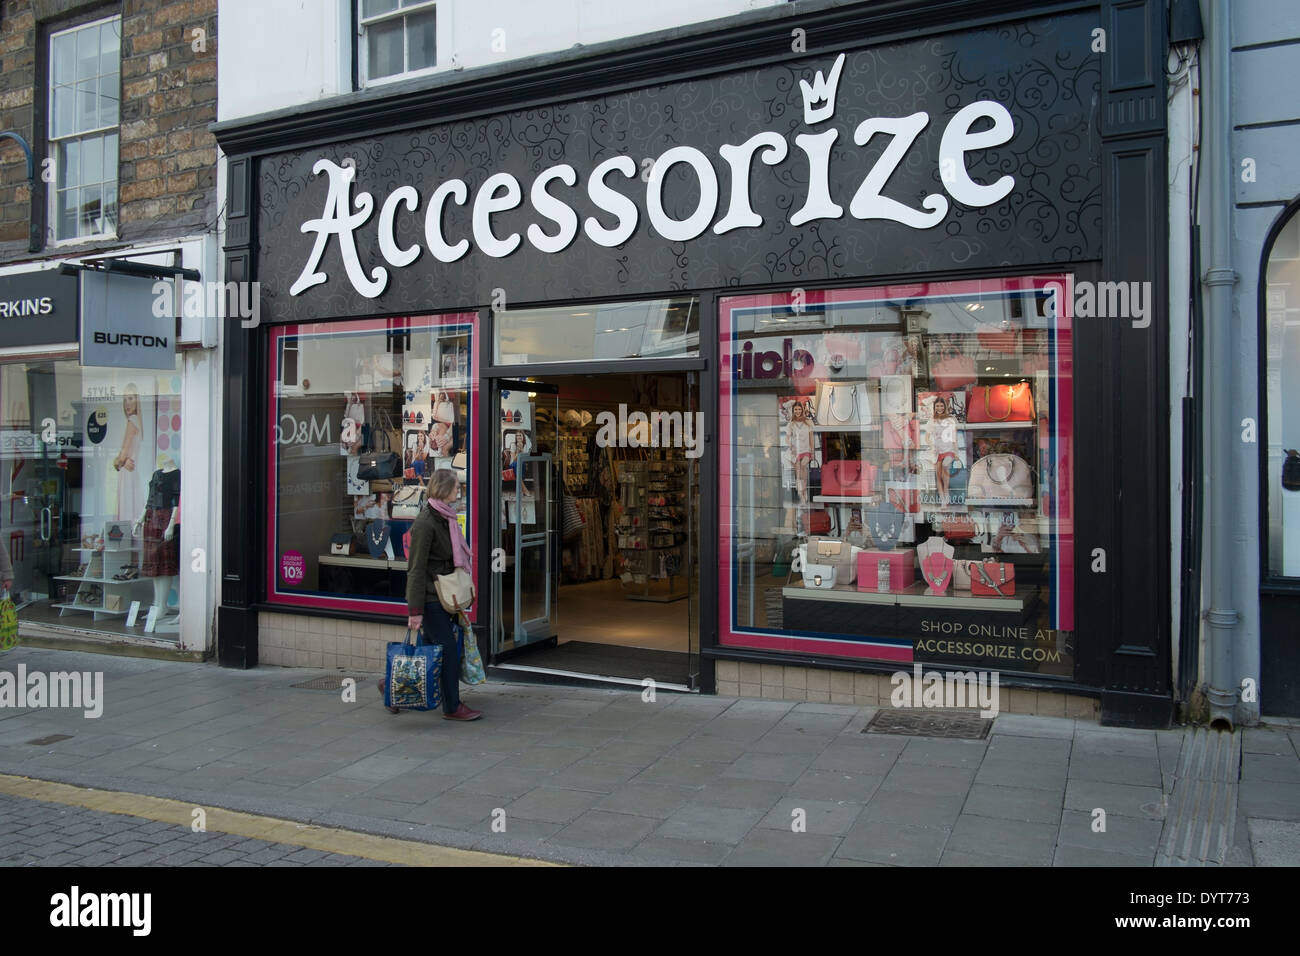 Accessorize Uk High Resolution Stock Photography and Images - Alamy